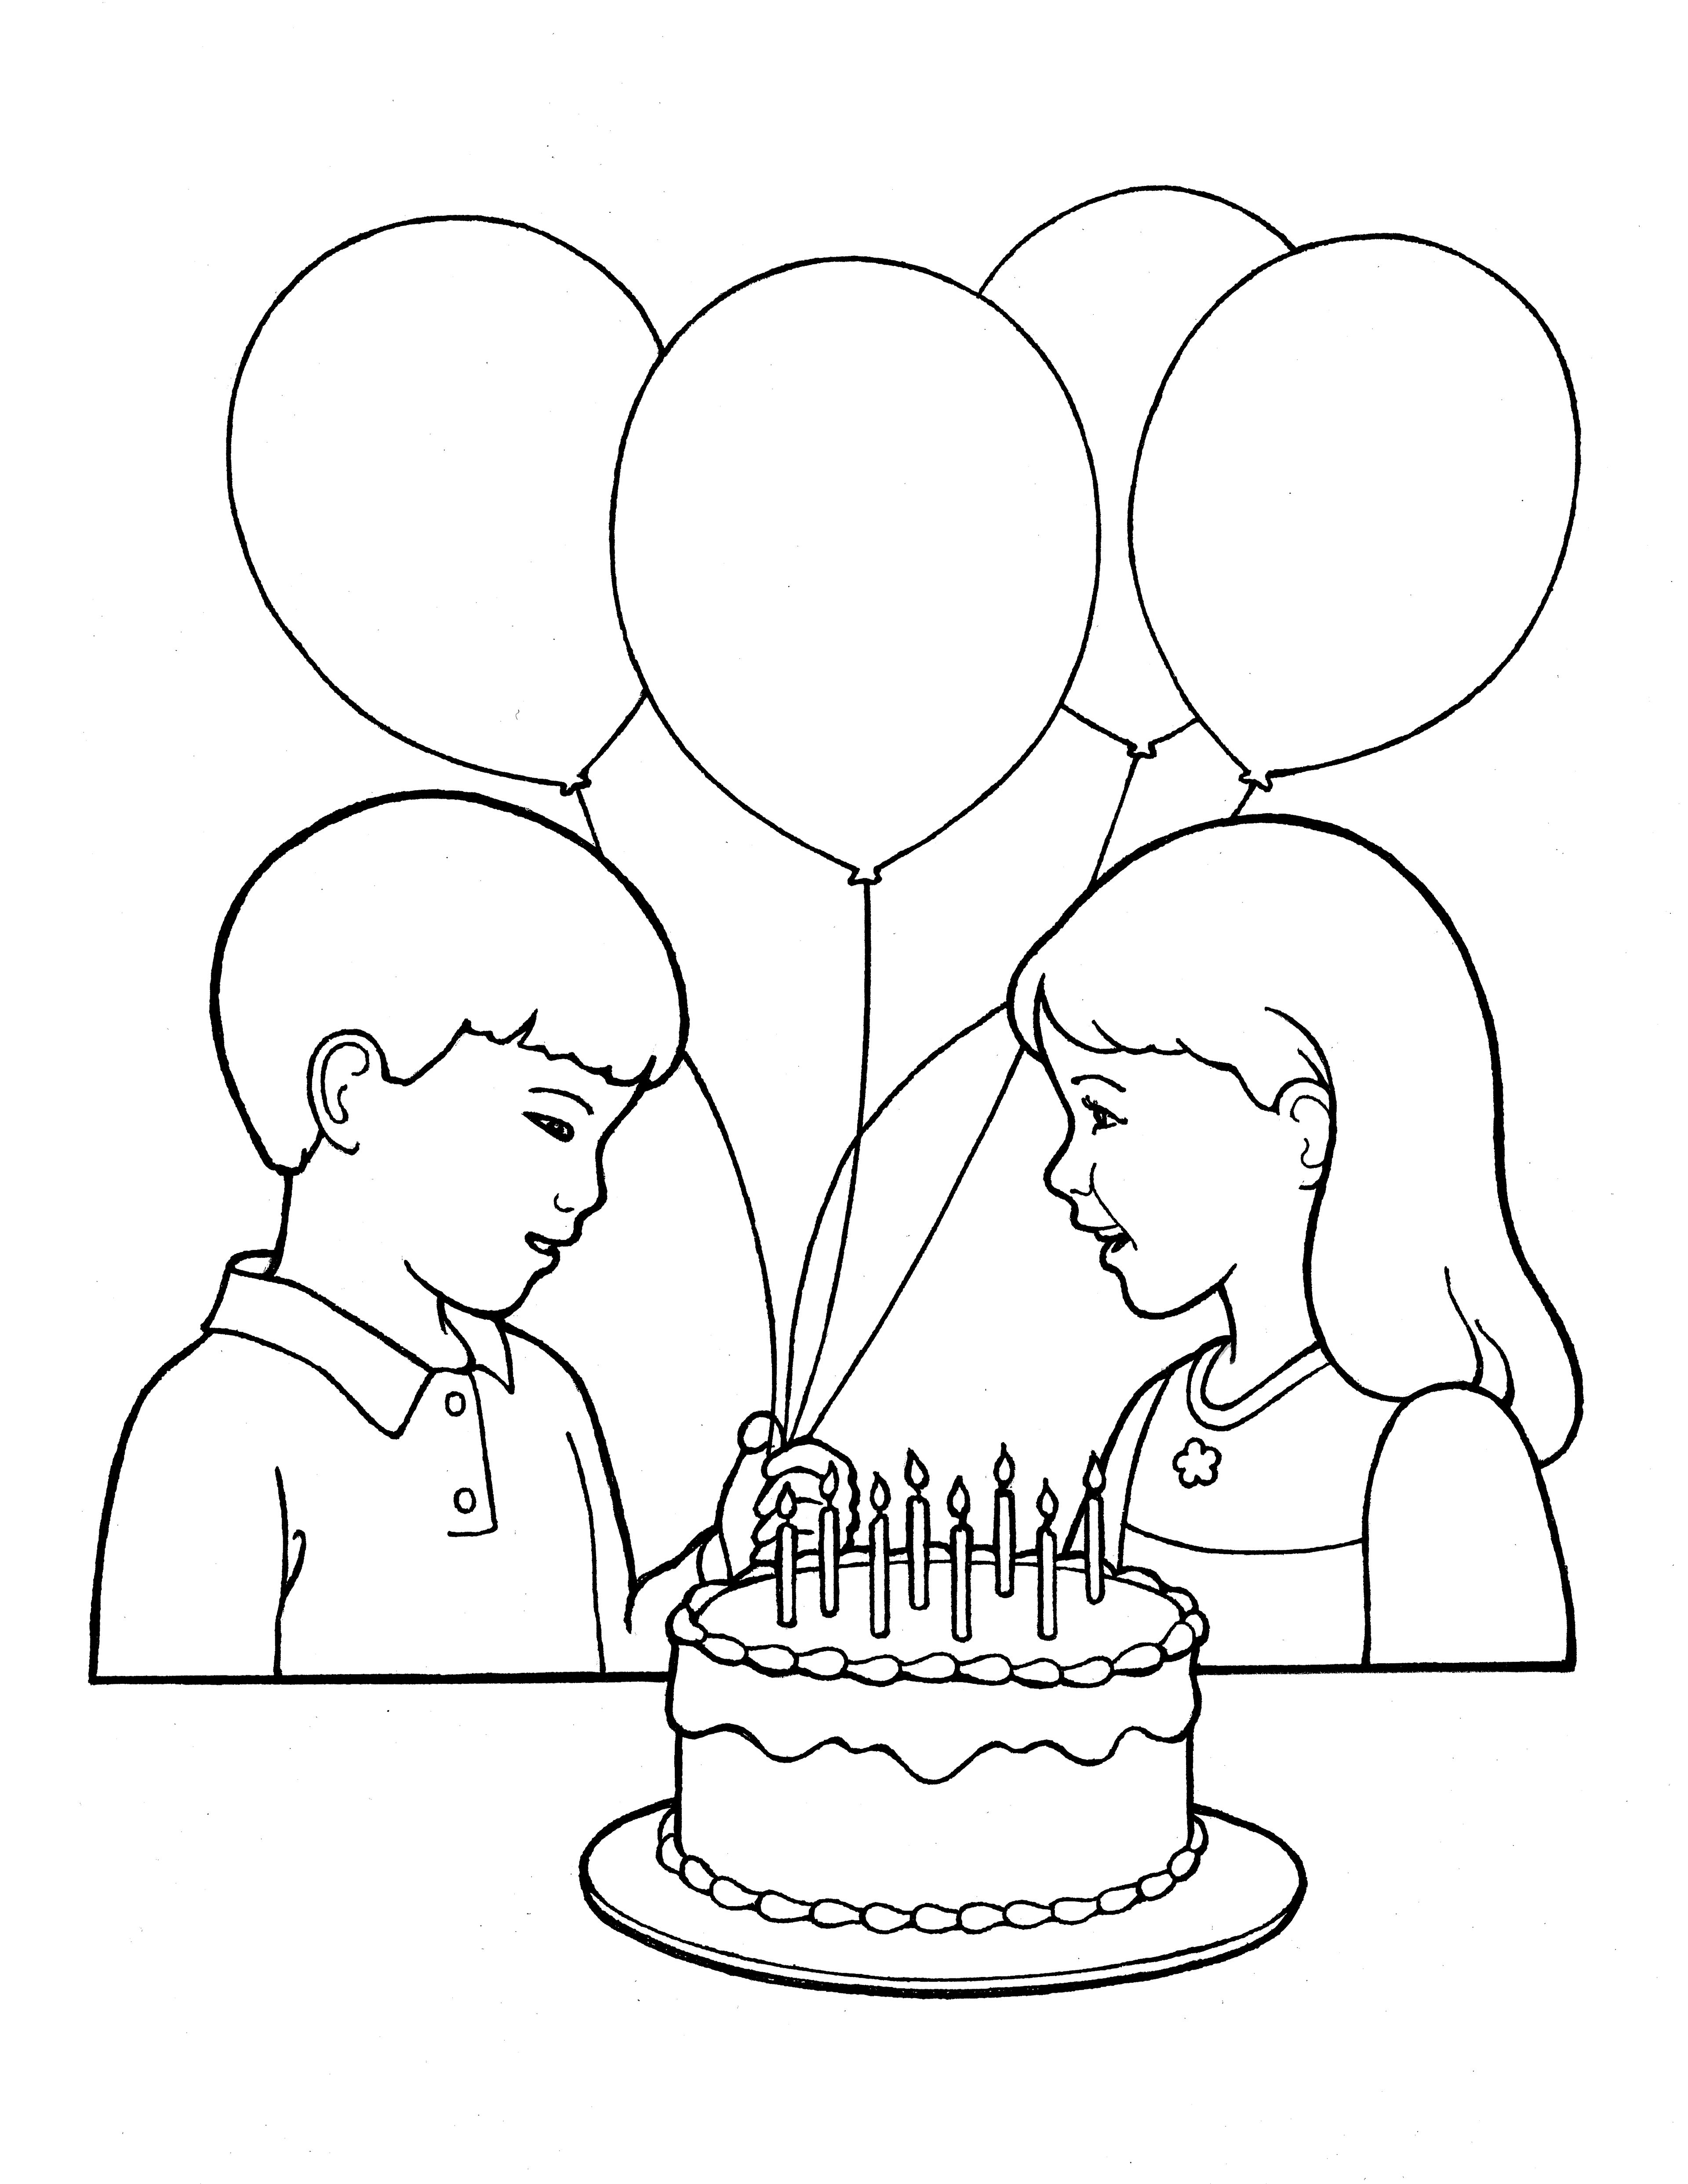 An illustration of a Primary girl and boy celebrating a birthday.